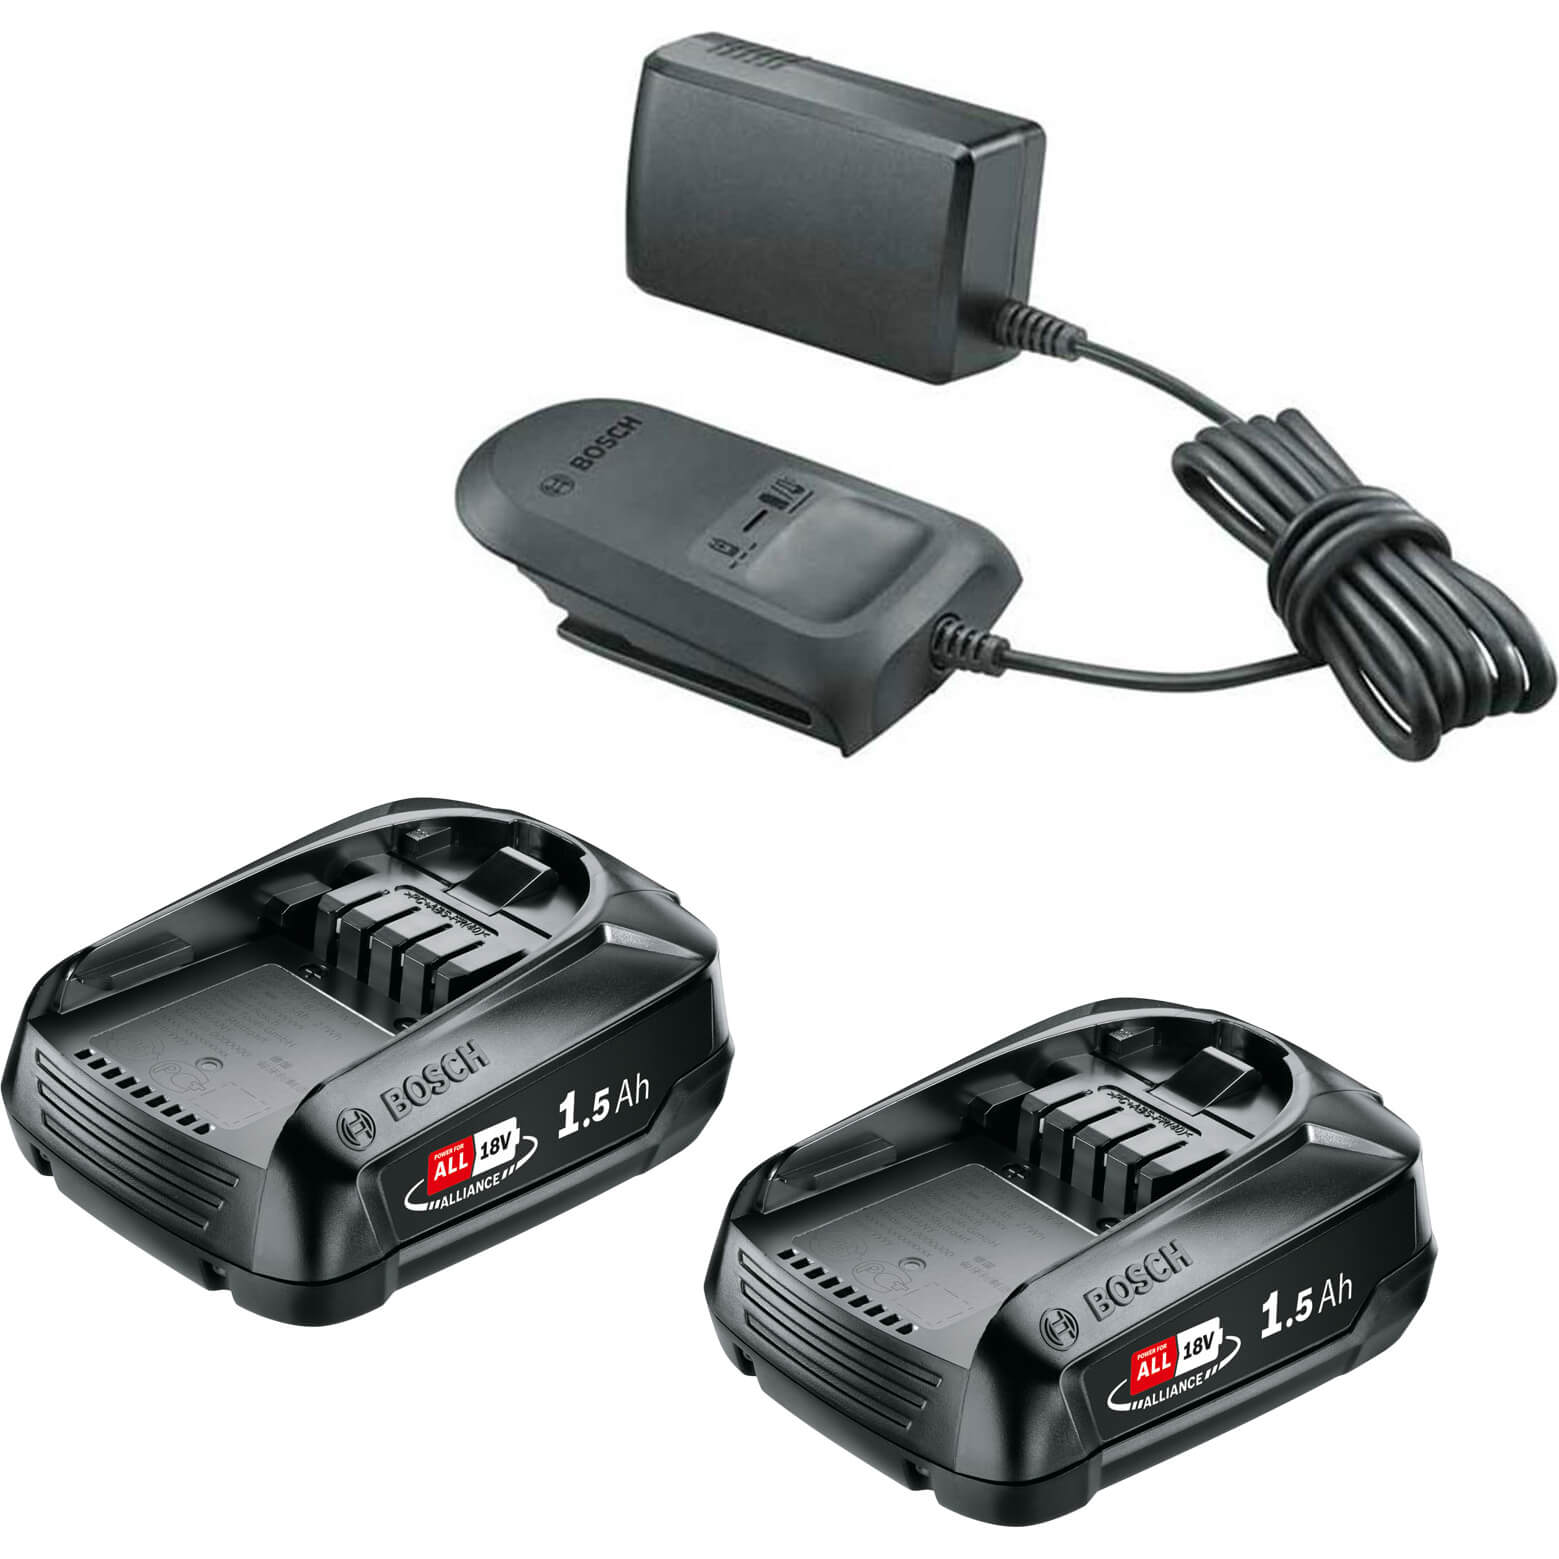 Image of Bosch Genuine GREEN 18v Cordless Li-ion Twin Battery 1.5ah and AL 1810 Charger 1.5ah